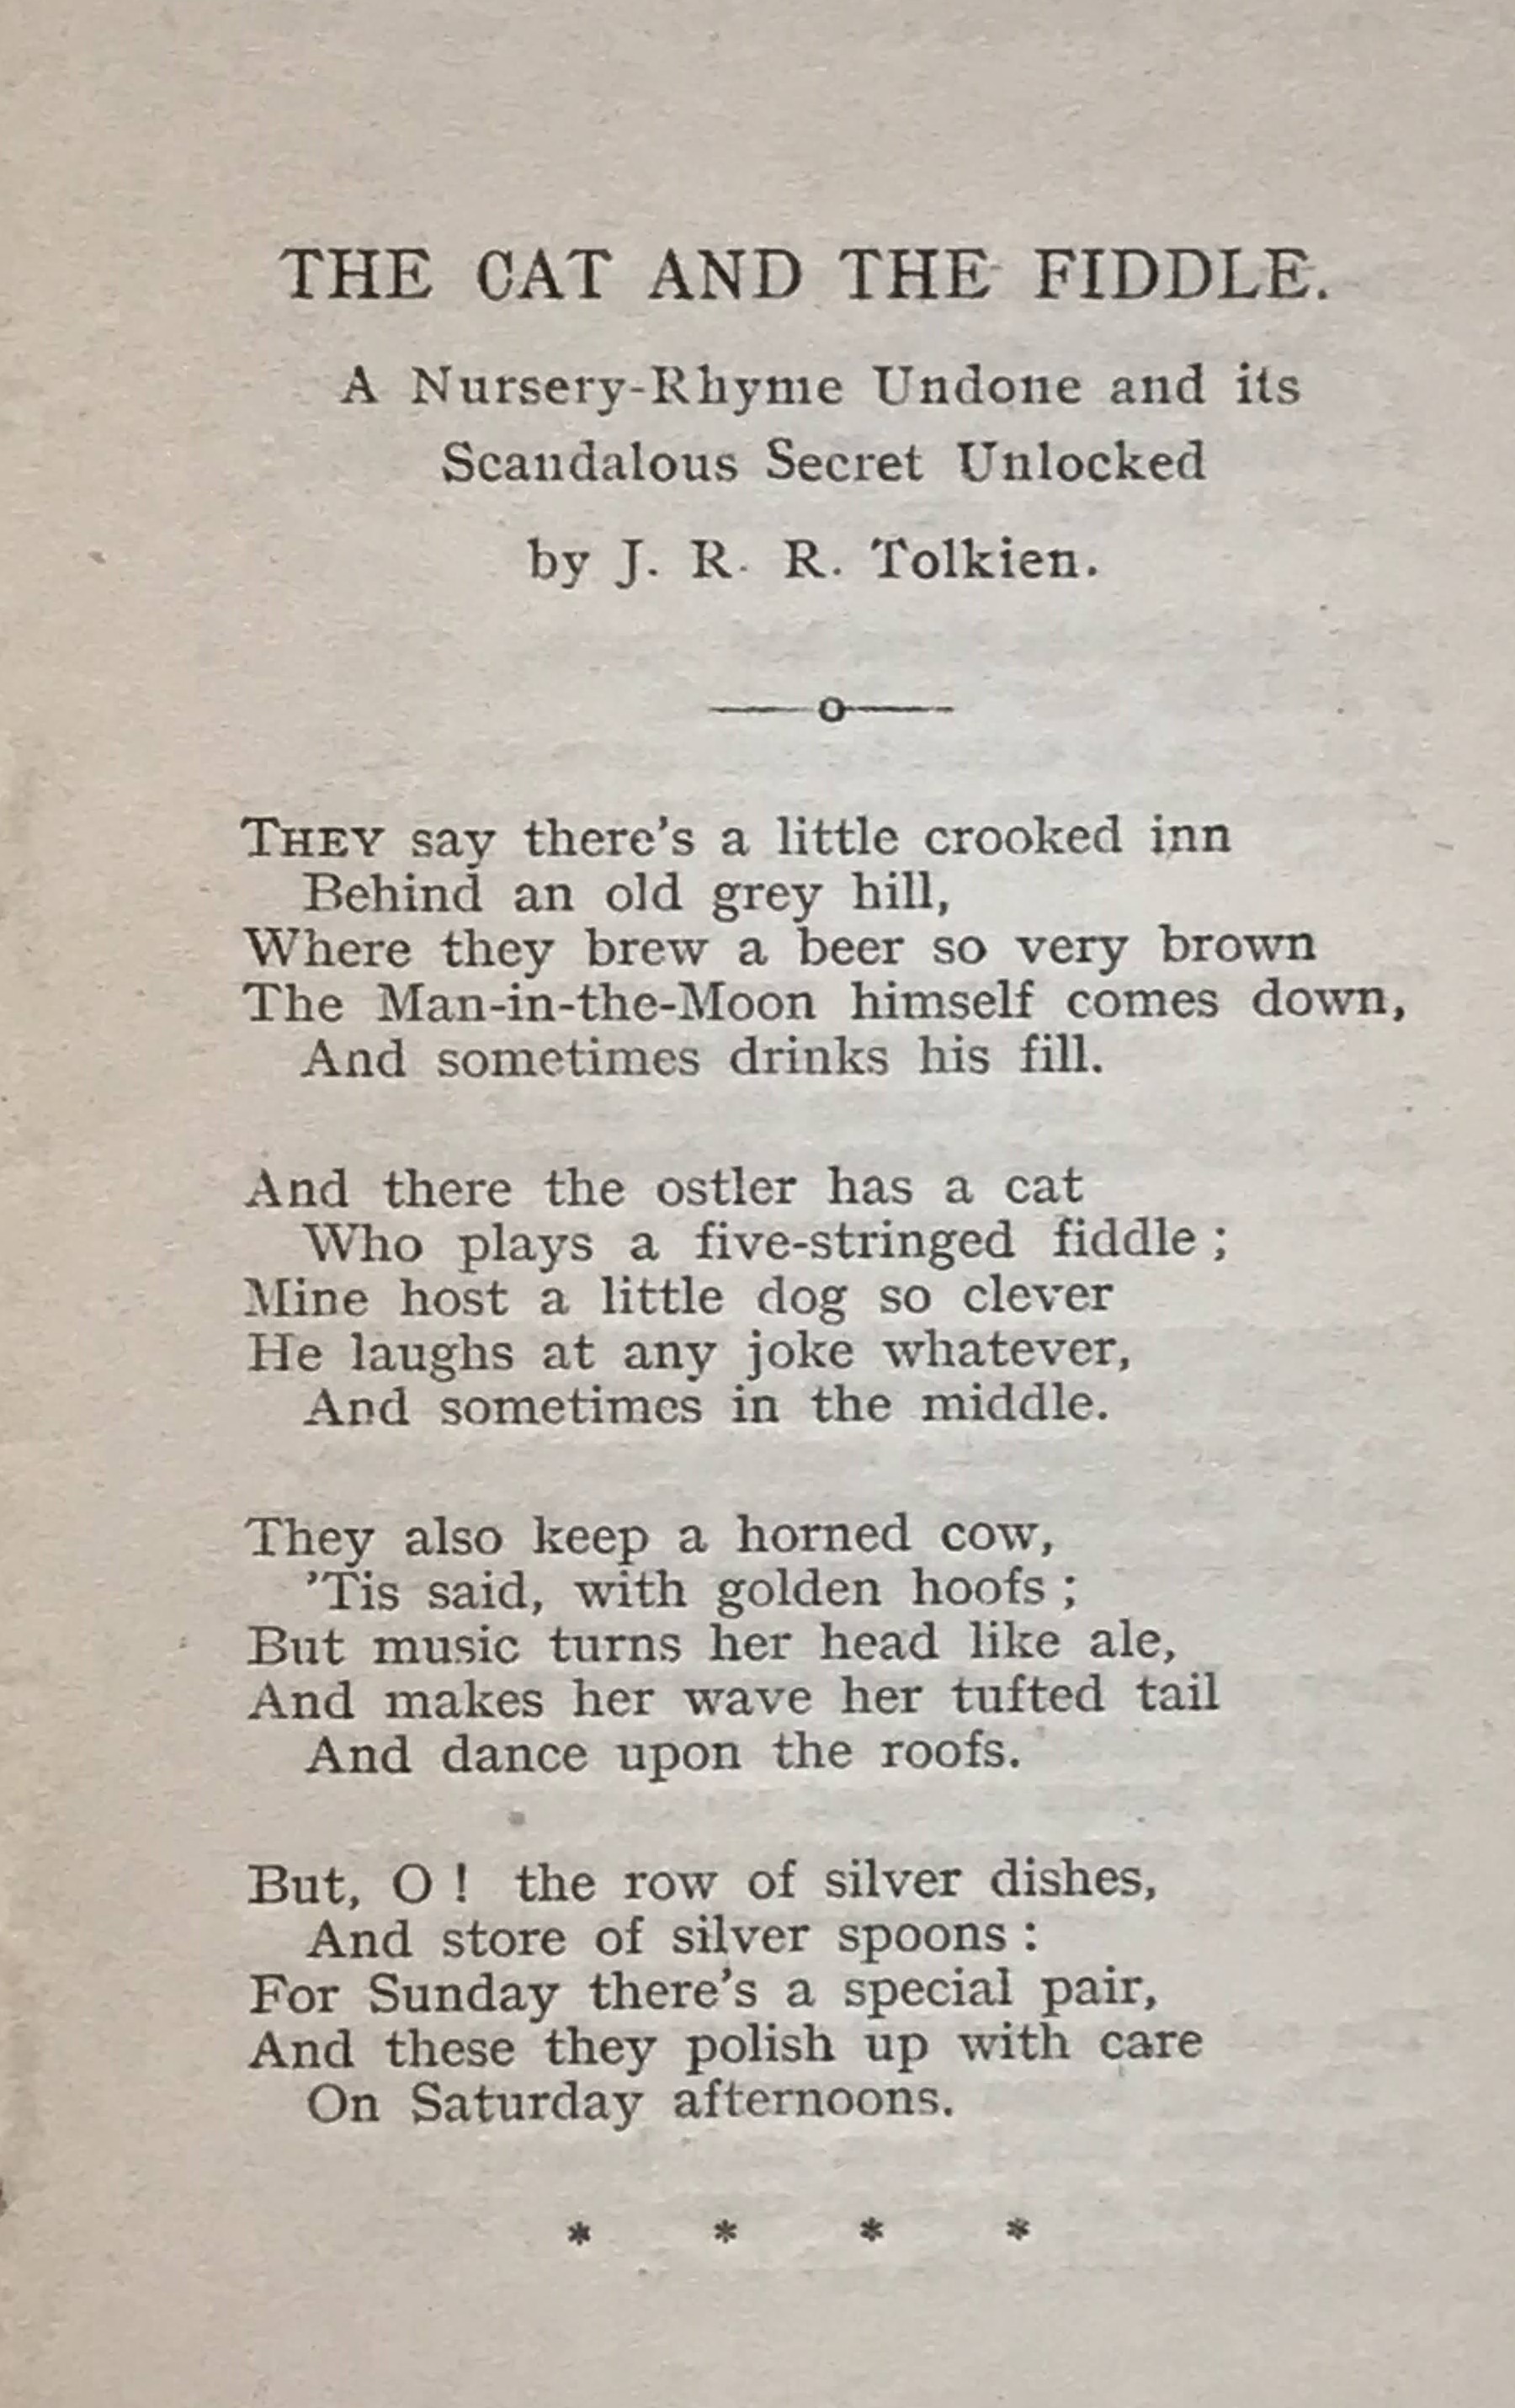 The Cat and the Fiddle A Nursery-Rhyme Undone and its Scandalous Secret Unlocked, Yorkshire Poetry, Vol. 11 No. 19, October-November 1923 page 1.jpg